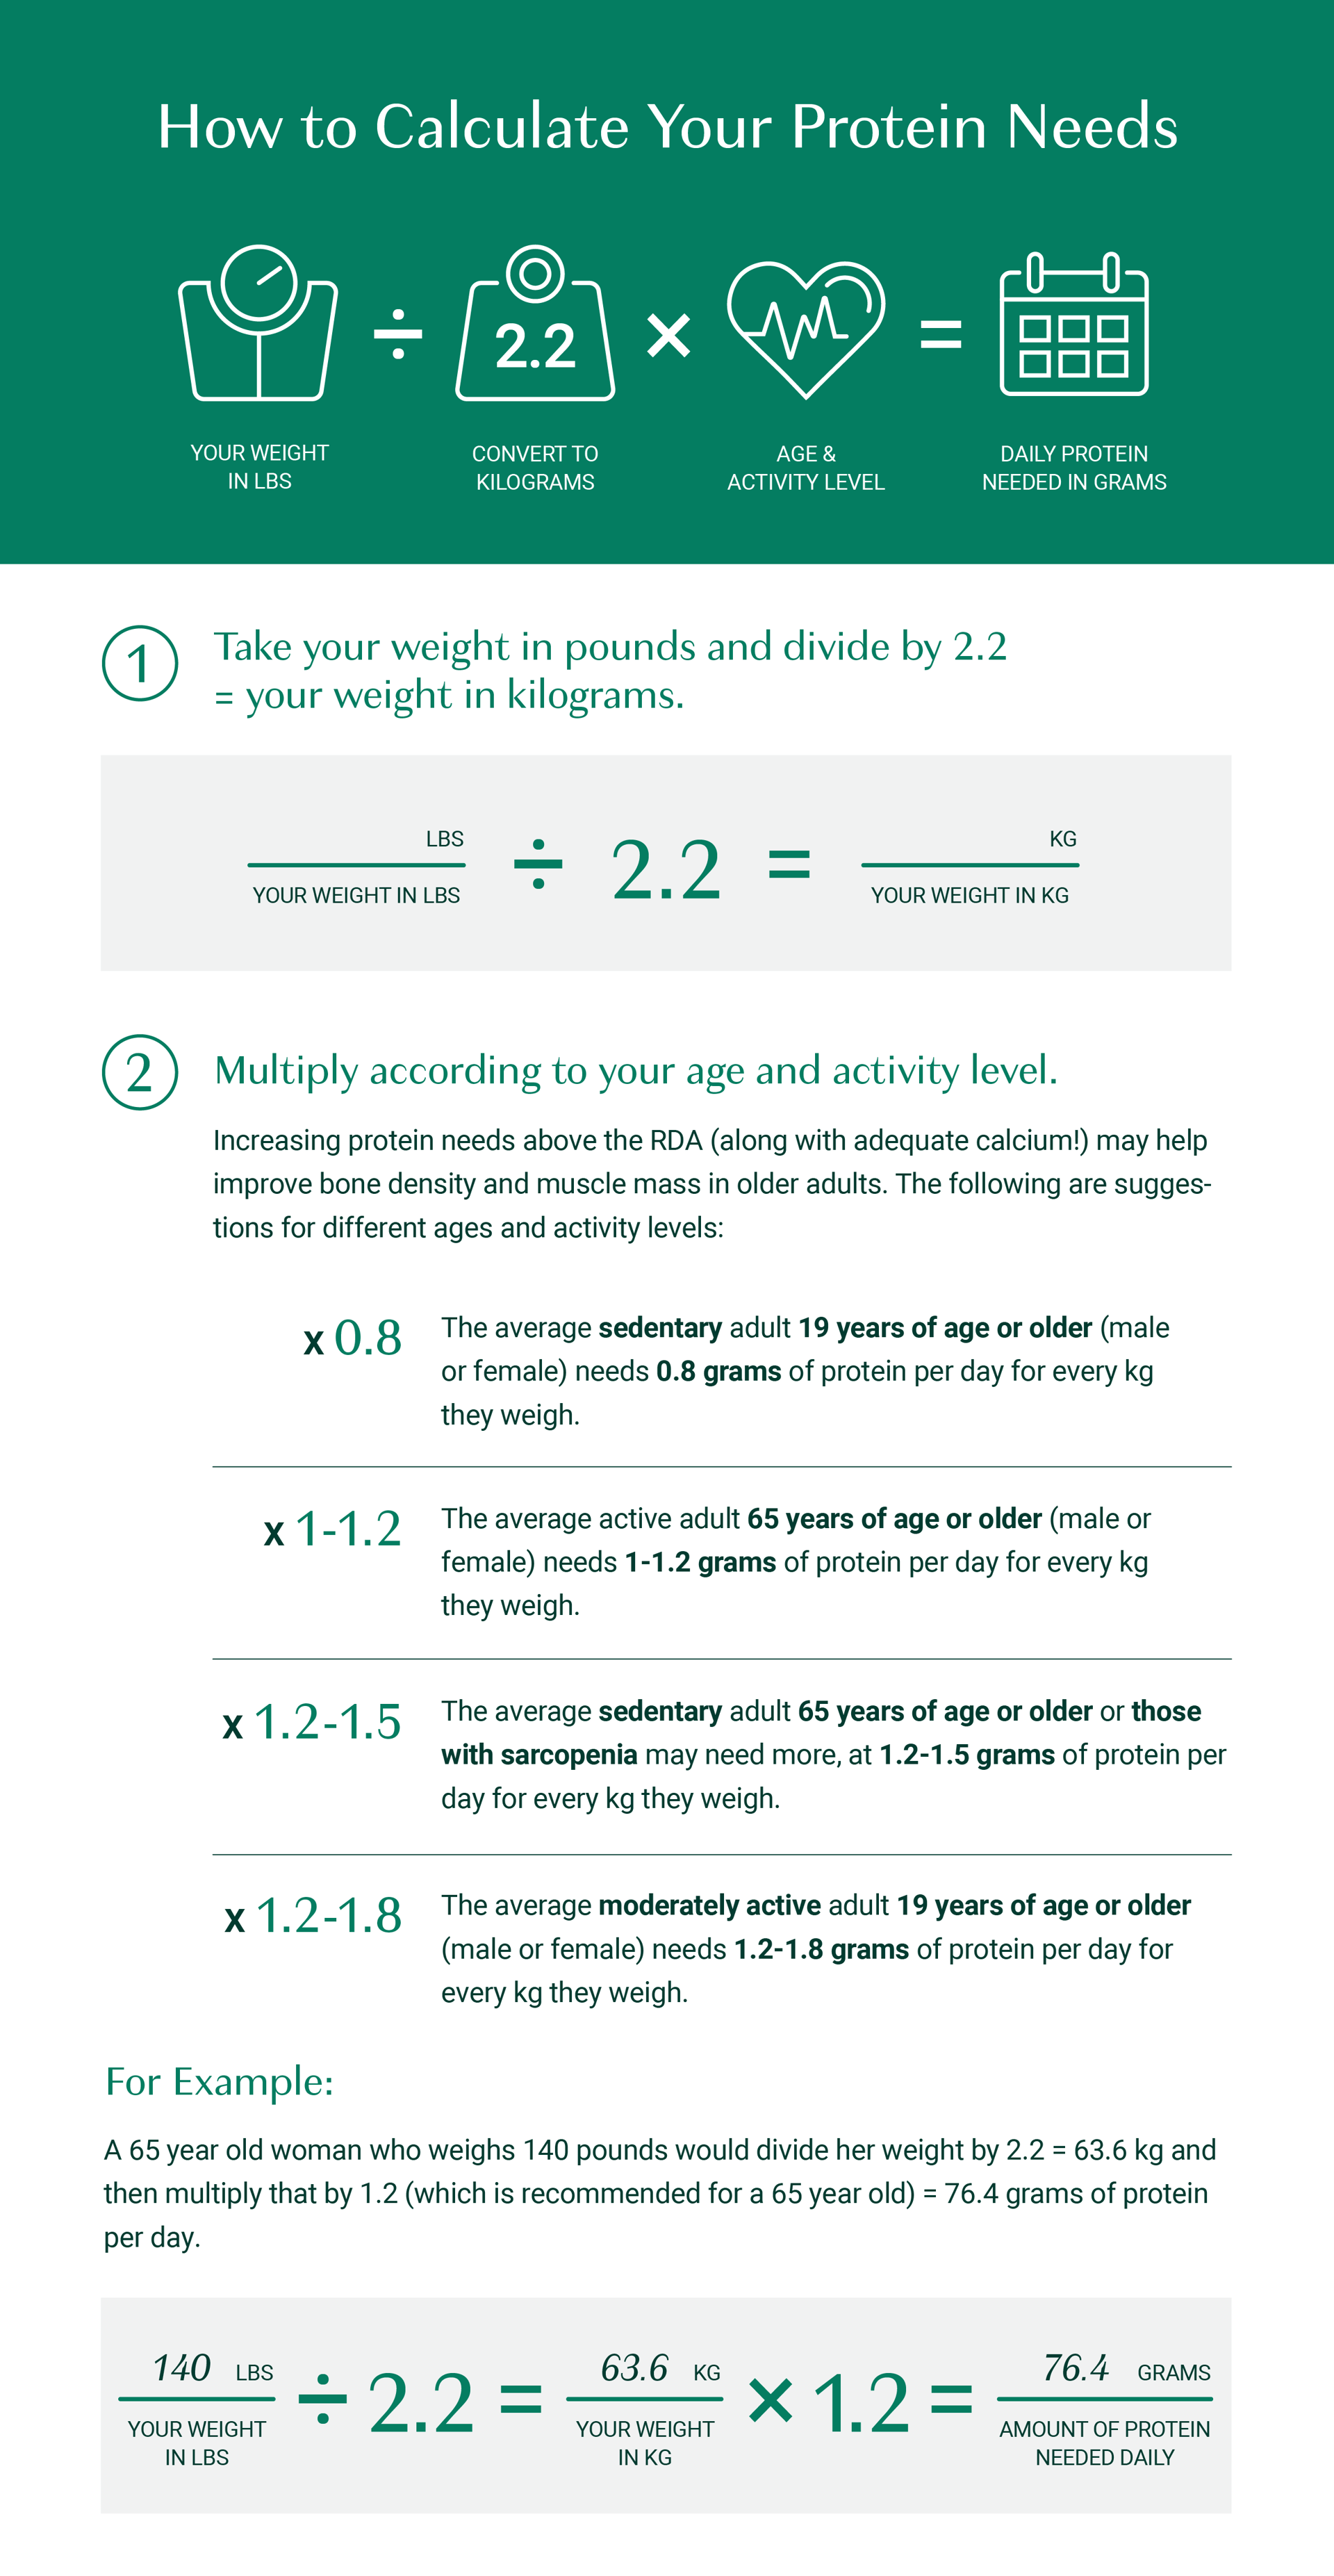 How to calculate your protein needs